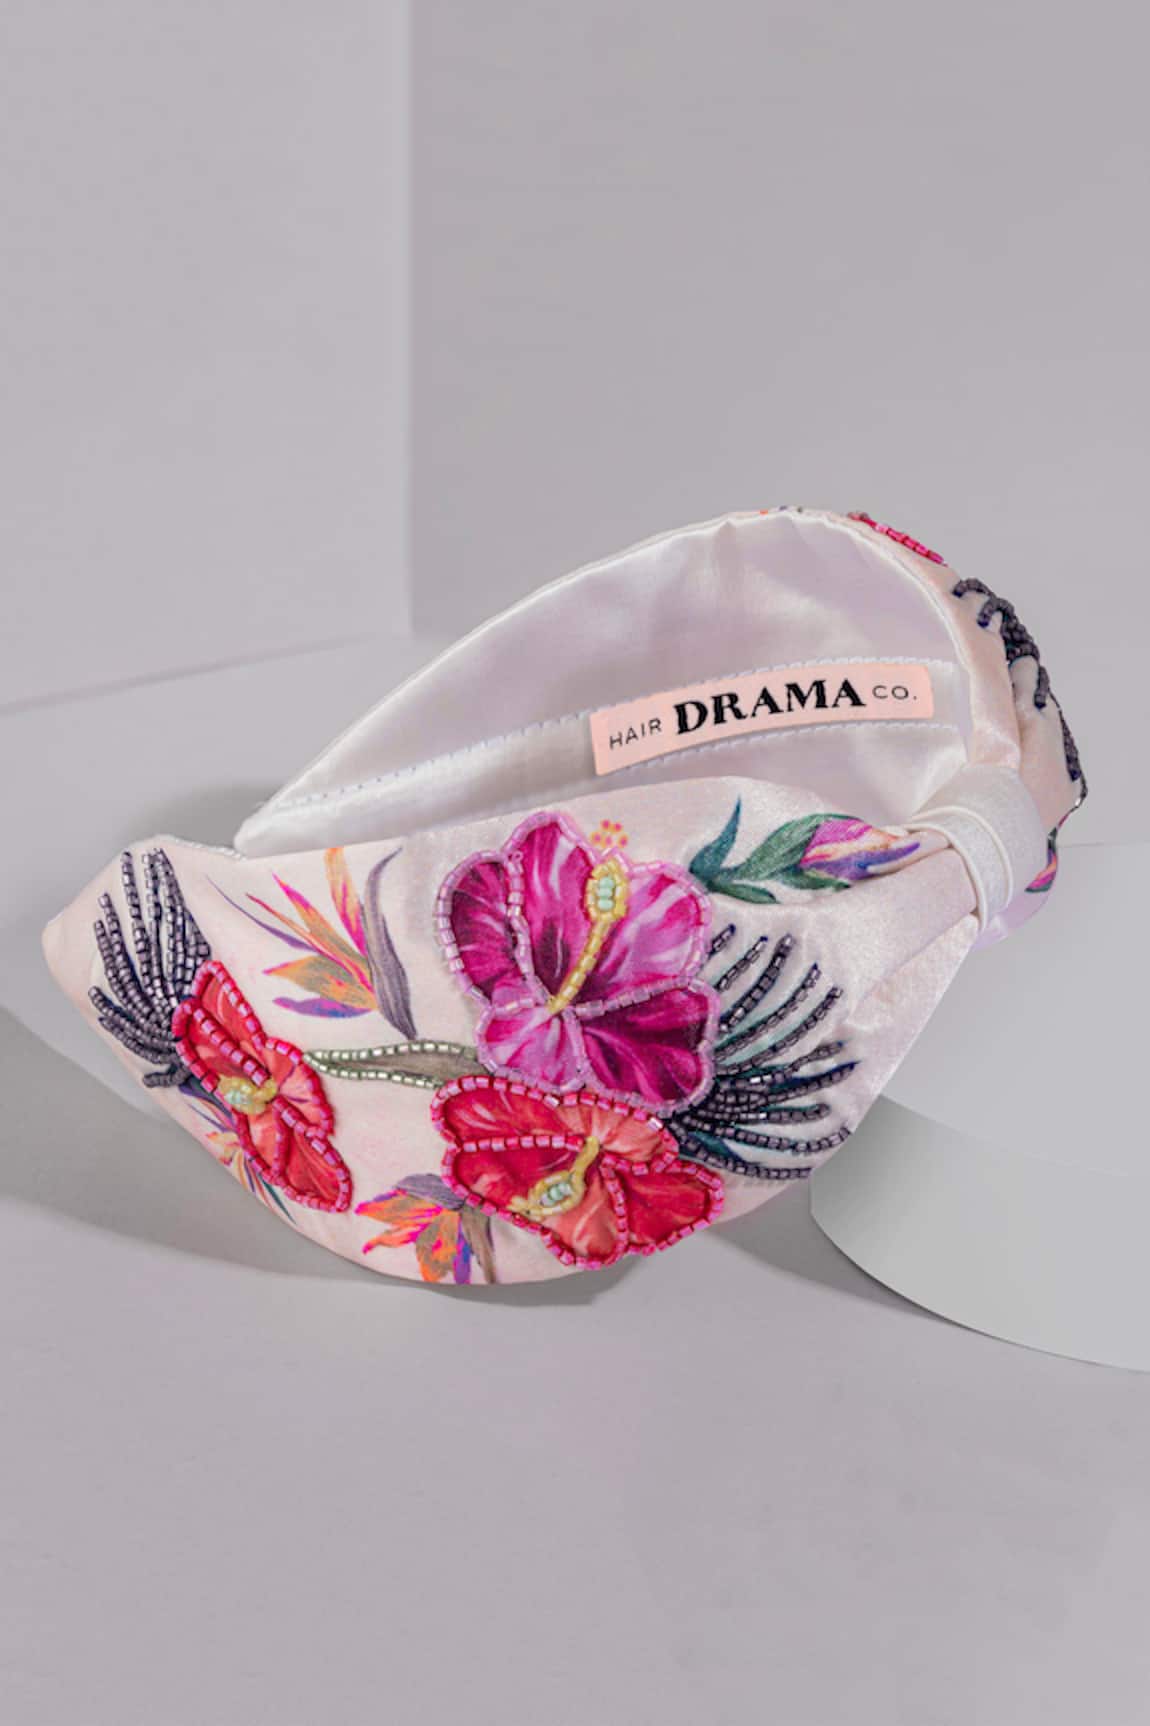 Hair Drama Co. Floral Knotted Hair Band